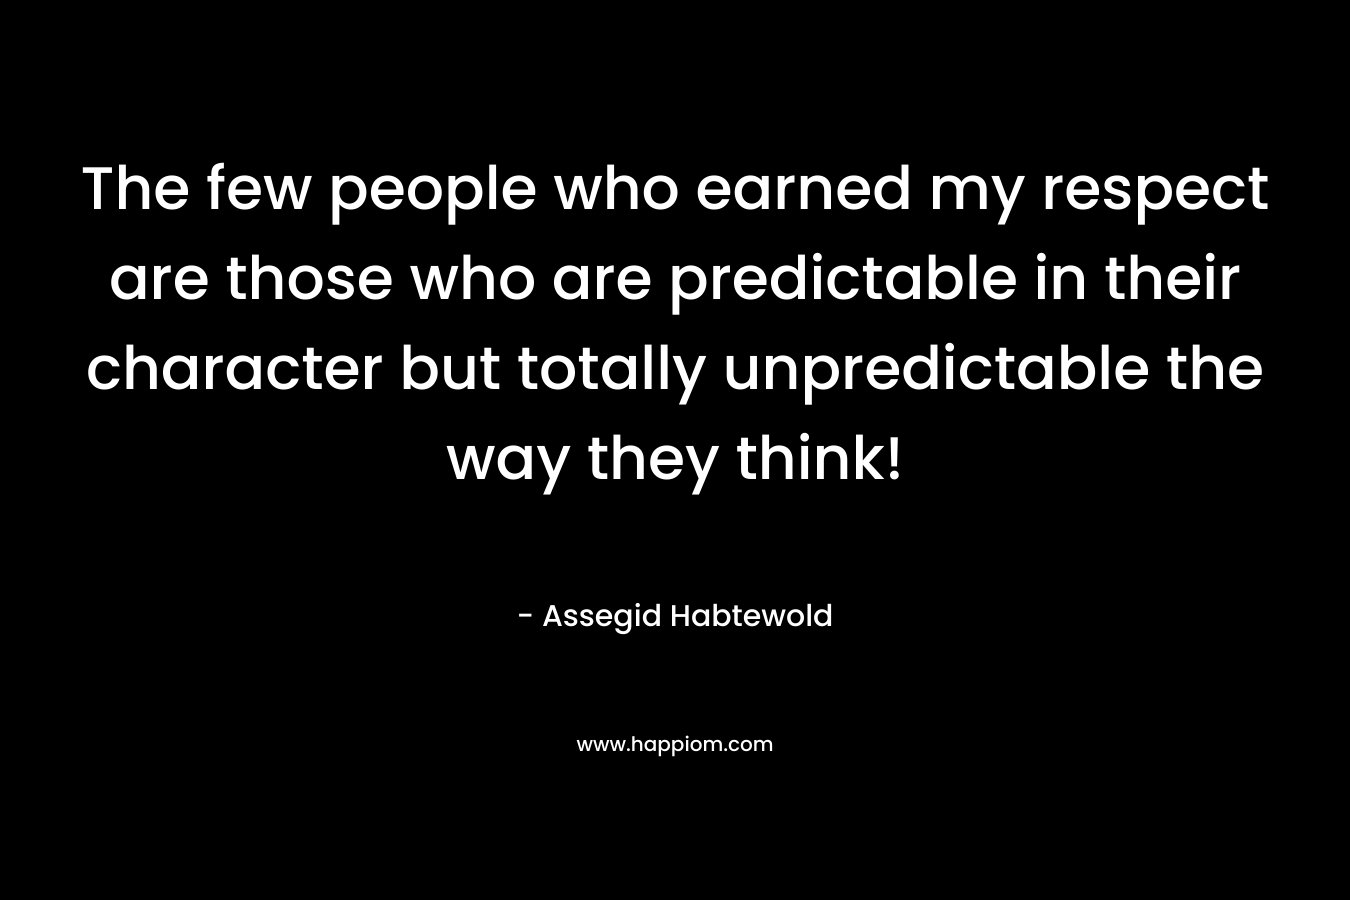 The few people who earned my respect are those who are predictable in their character but totally unpredictable the way they think!